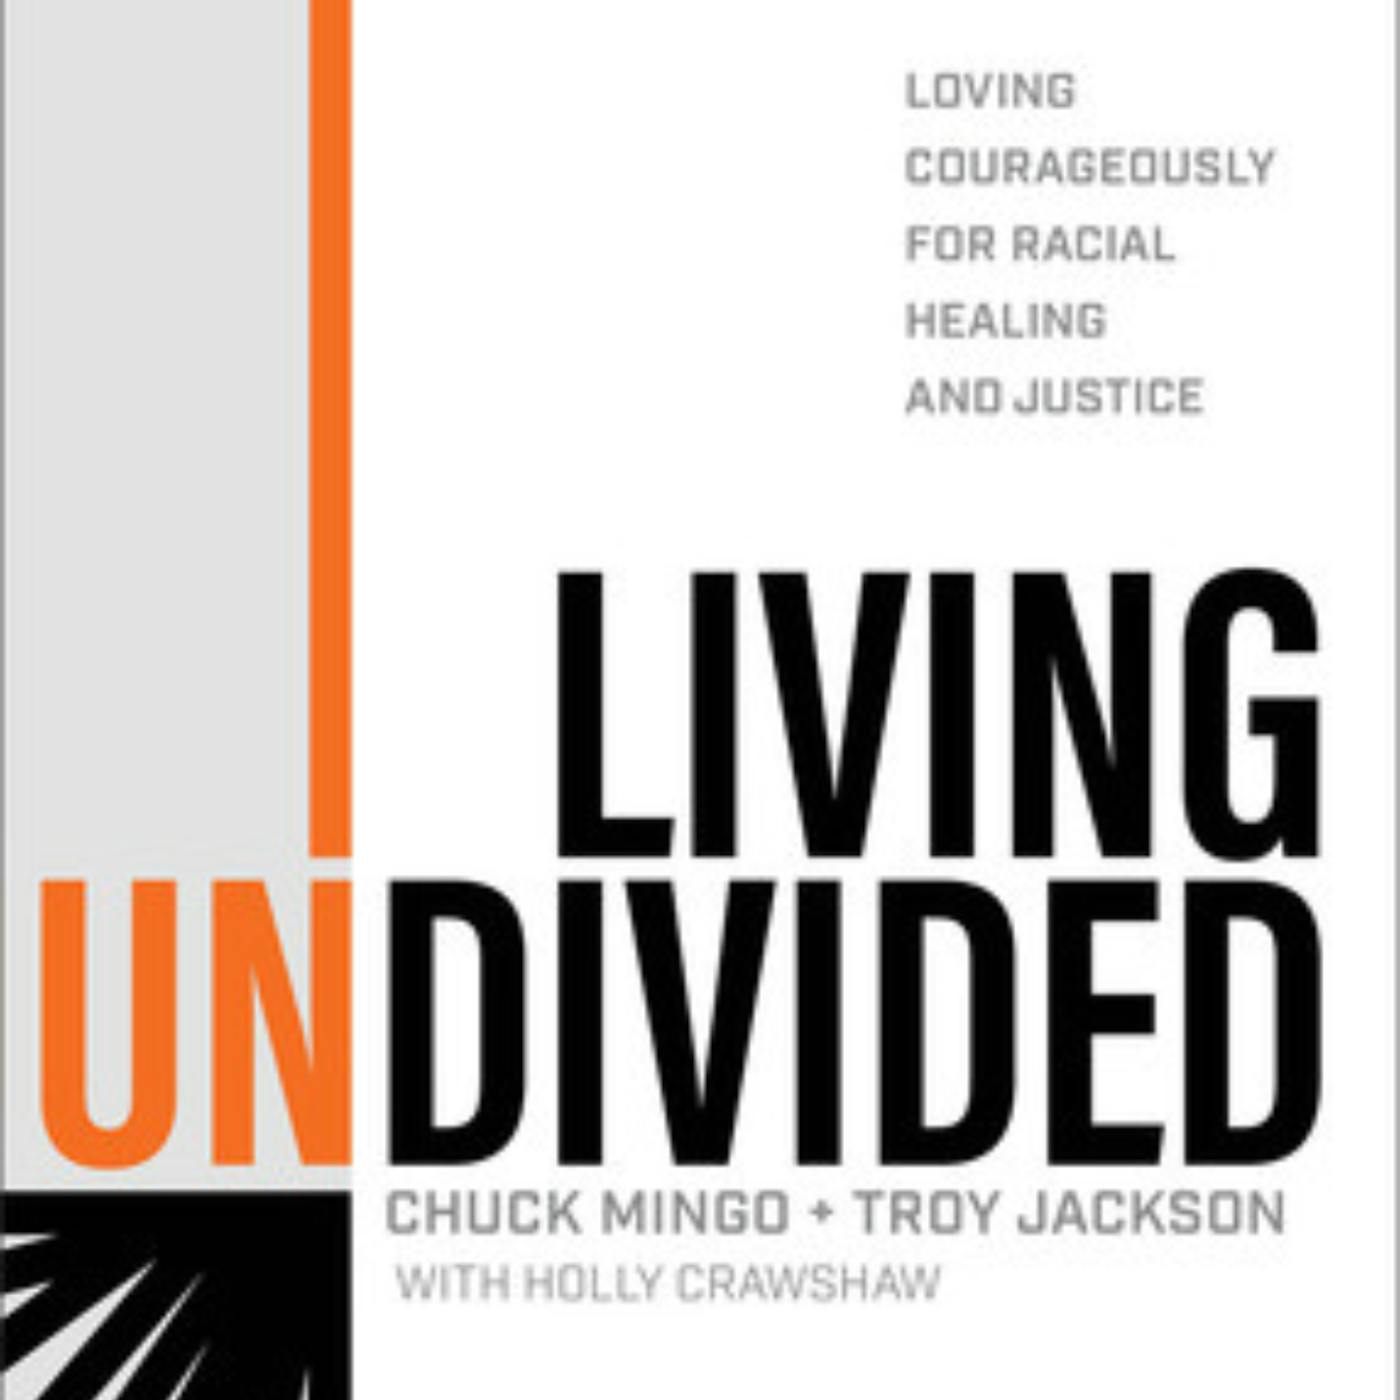 223. Living Undivided, Loving Courageously for Racial Healing and Justice // Chuck Mingo and Troy Jackson